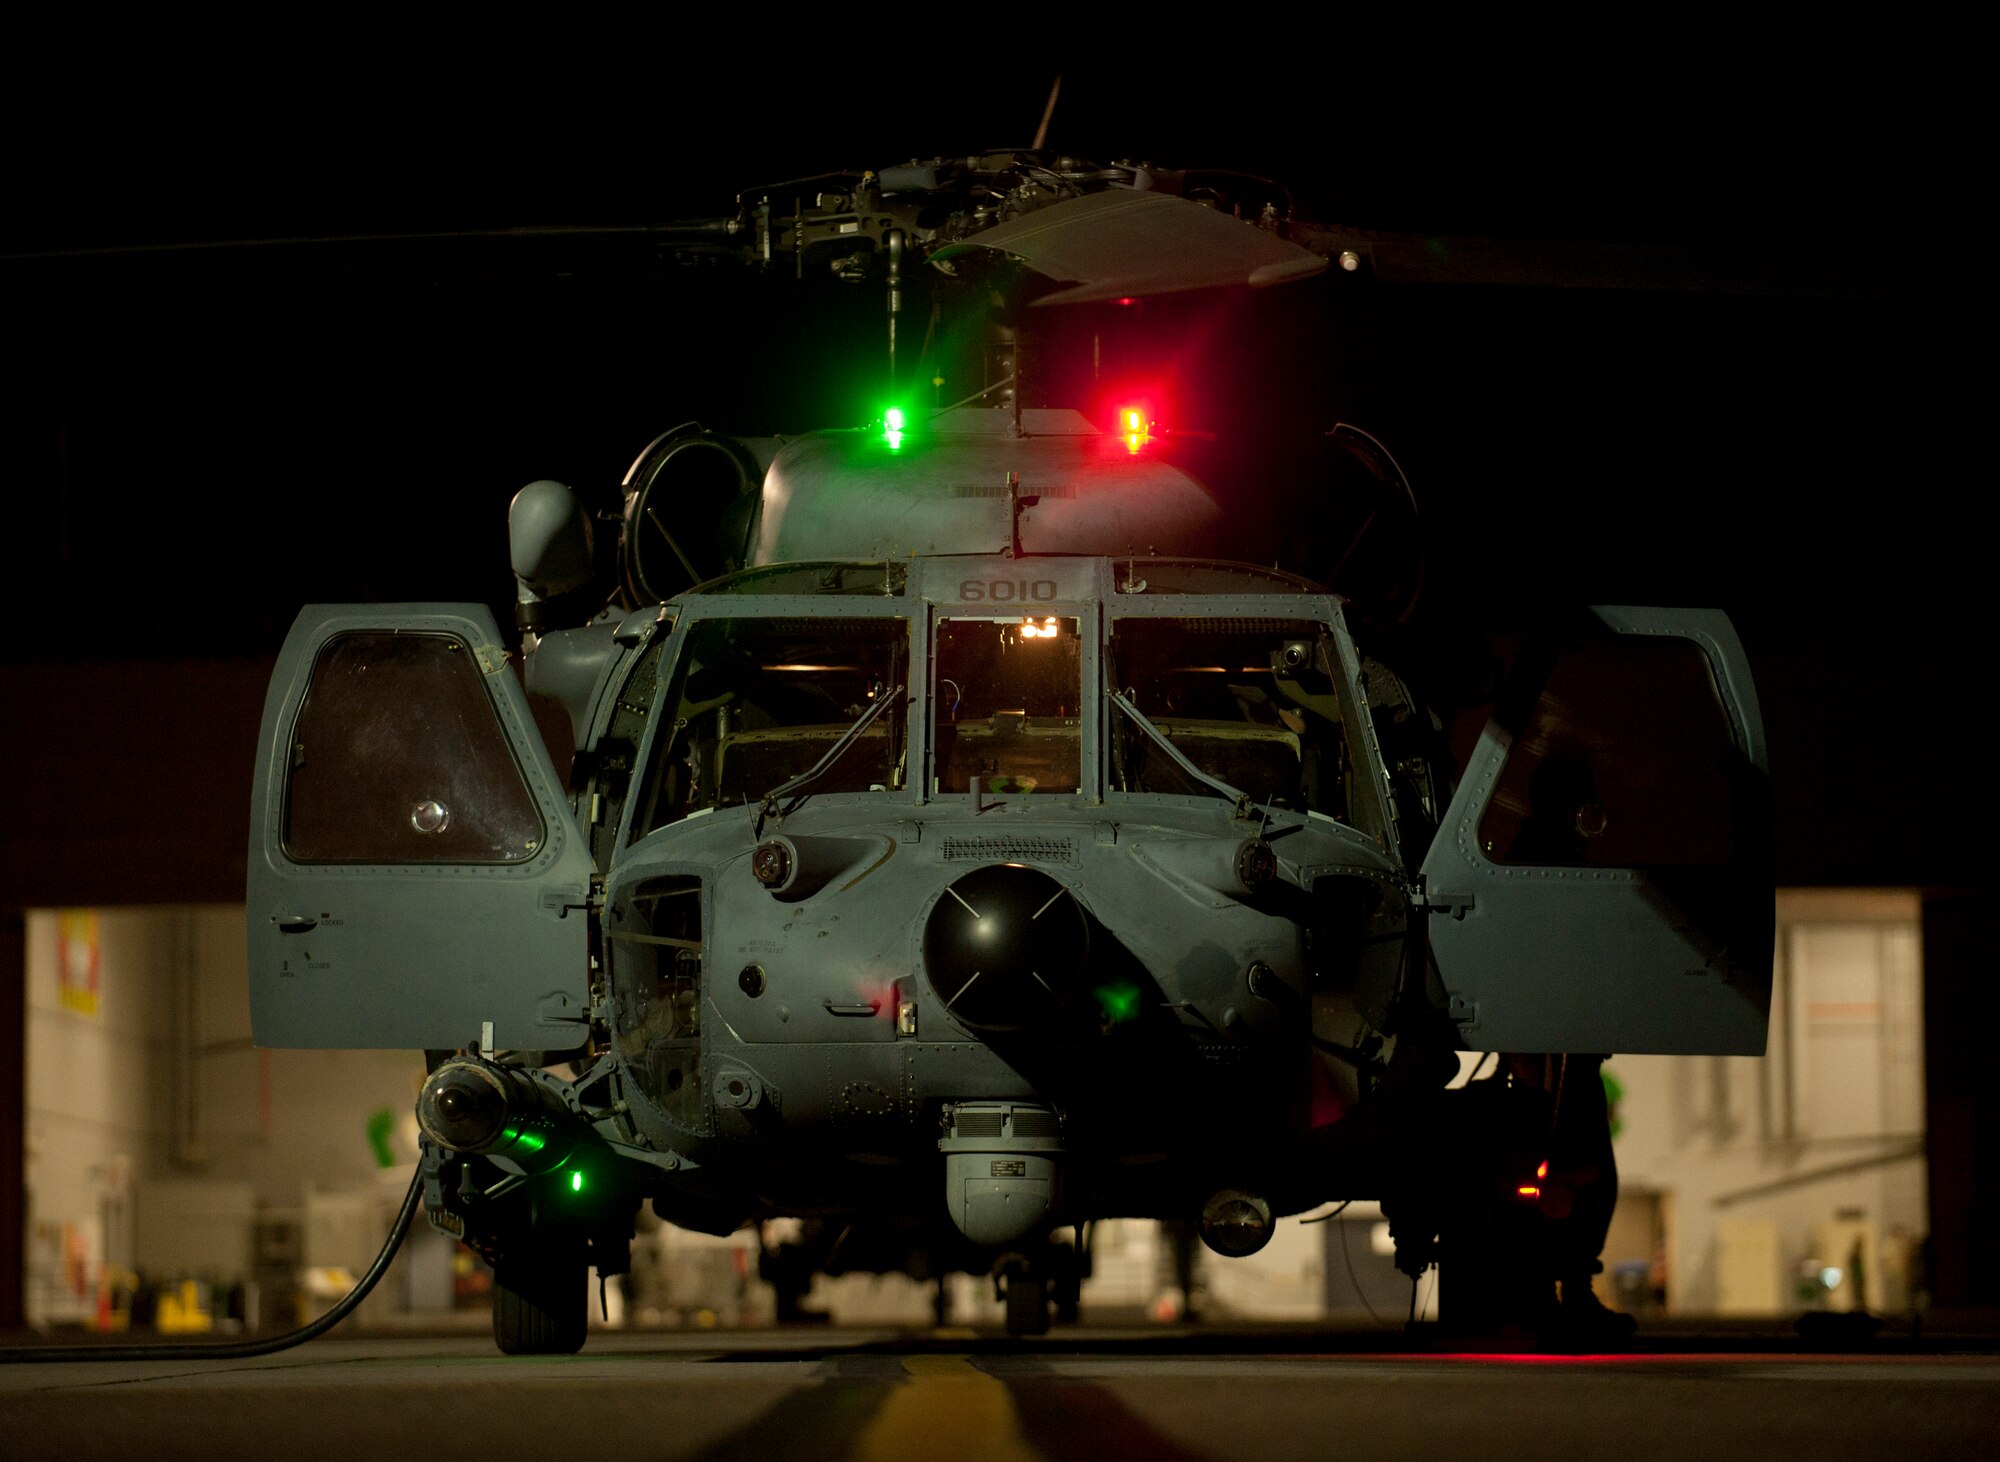 An HH-60G Pave Hawk assigned to the 66th Rescue Squadronis serviced by maintainers prior to a Red Flag 15-1 personnel recovery training scenario at Nellis Air Force Base, Nev., Feb. 5, 2015. The Pave Hawk is the U.S. Air Force version of the UH-60 Black Hawk modified for aircrew search and rescue in all-weather situations. The Pave Hawk performs special missions including search and rescue, combat support and airborne medical evacuation. (U.S. Air Force photo by Airman 1st Class Joshua Kleinholz)